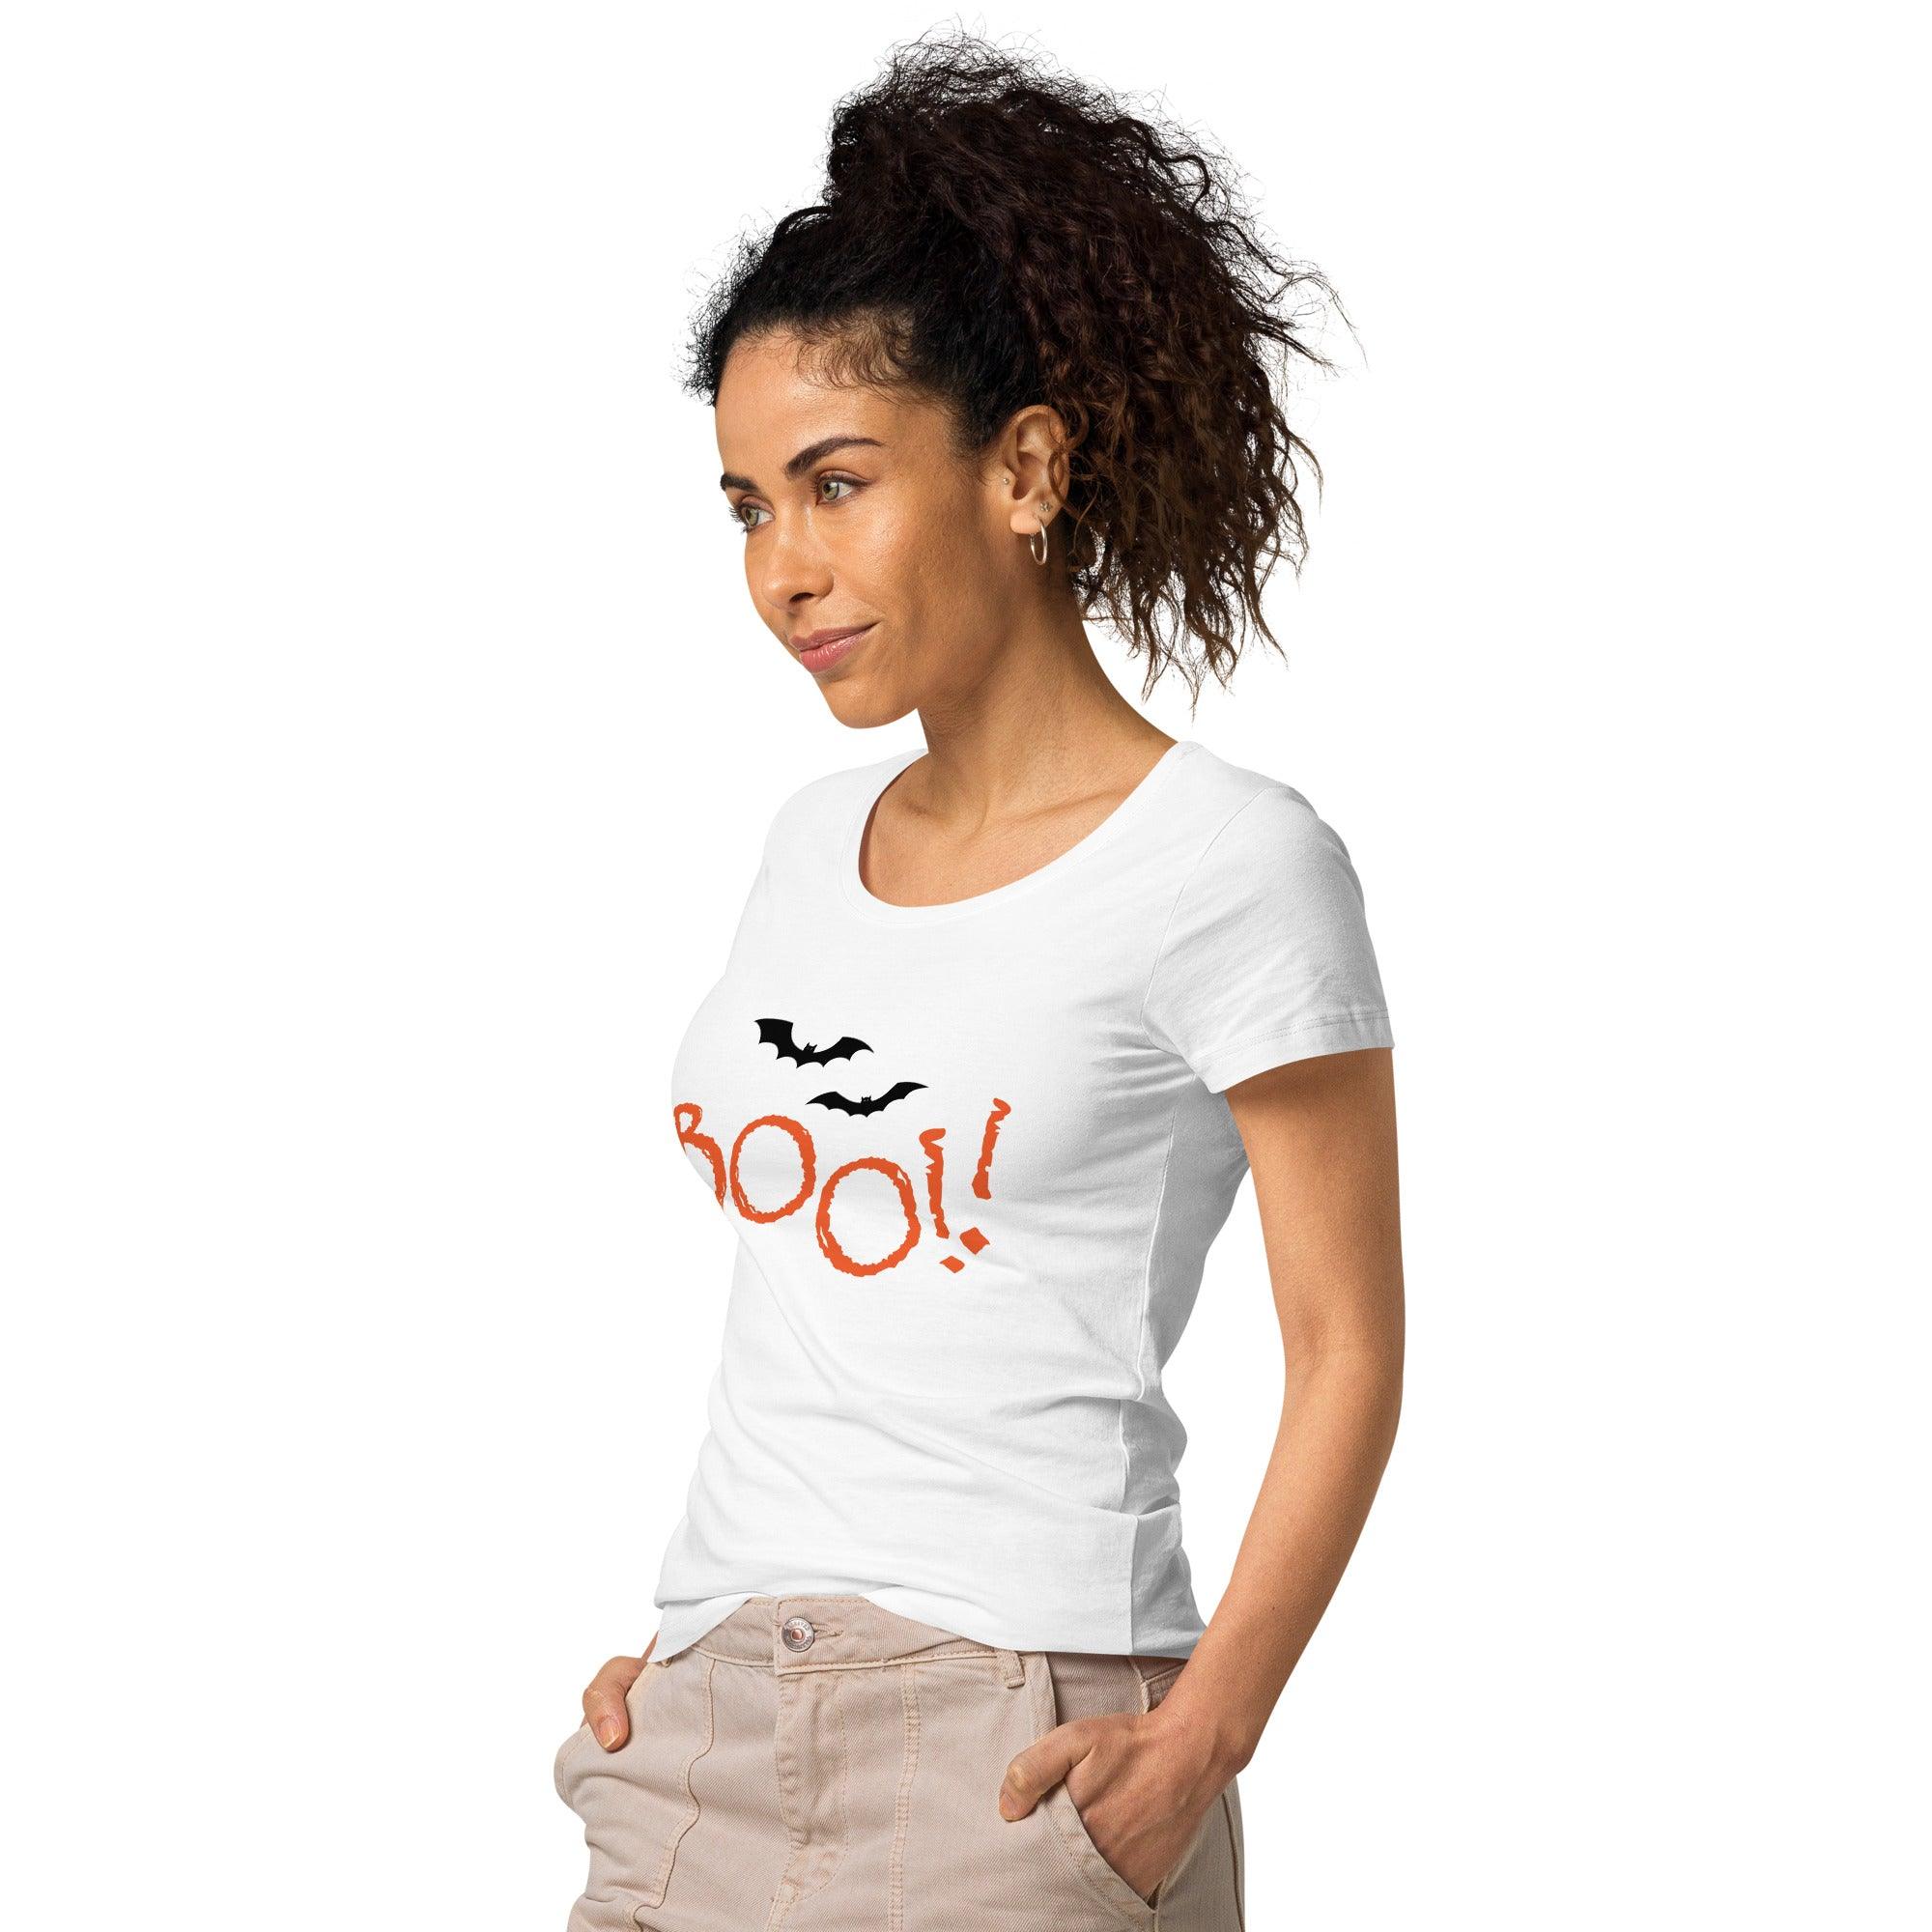 Styling the 'Wickedly Comfy' Women's Tee for Halloween, pairing it with jeans for a casual, eco-friendly October look.